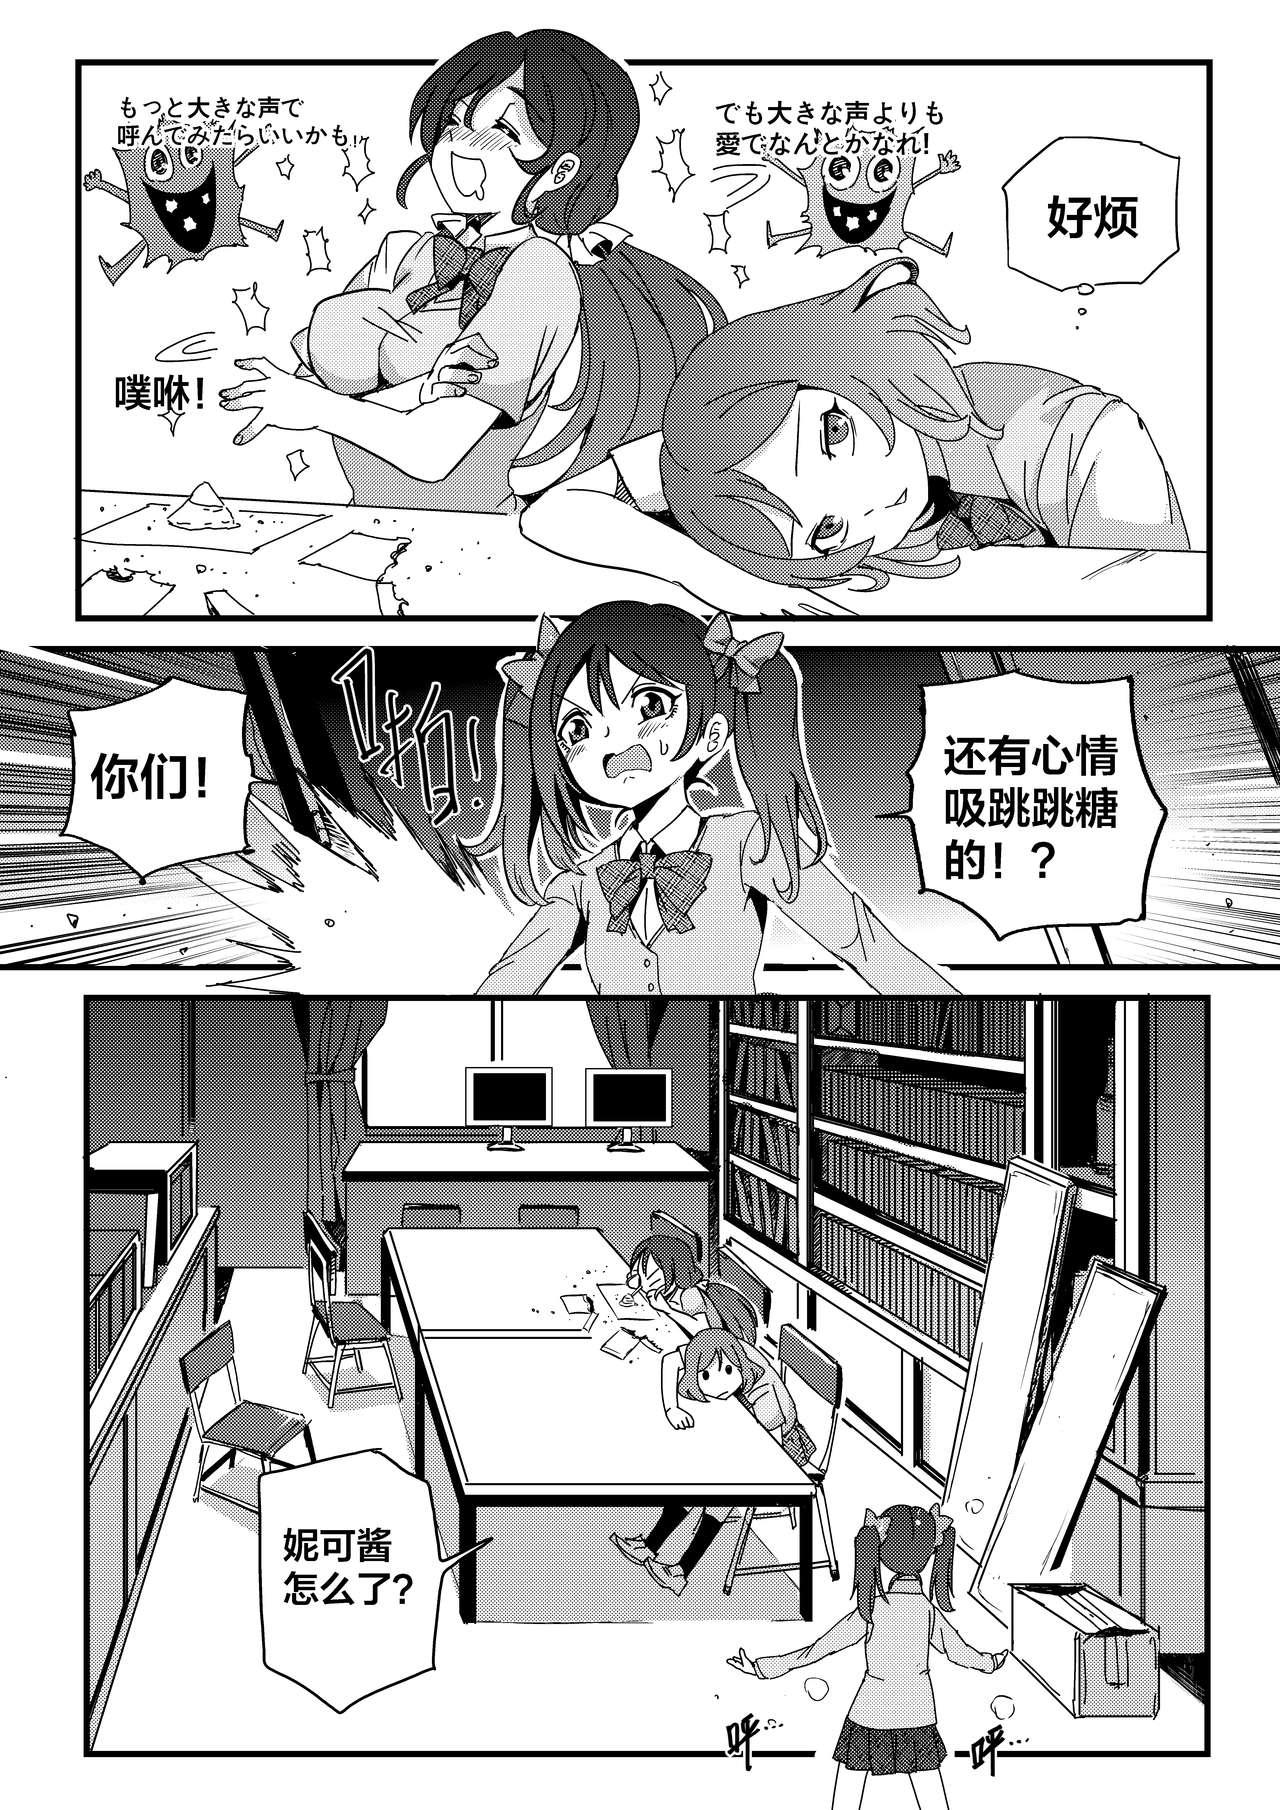 Music 果胆卯威 - Kantai collection The idolmaster Love live Tgirl - Page 2